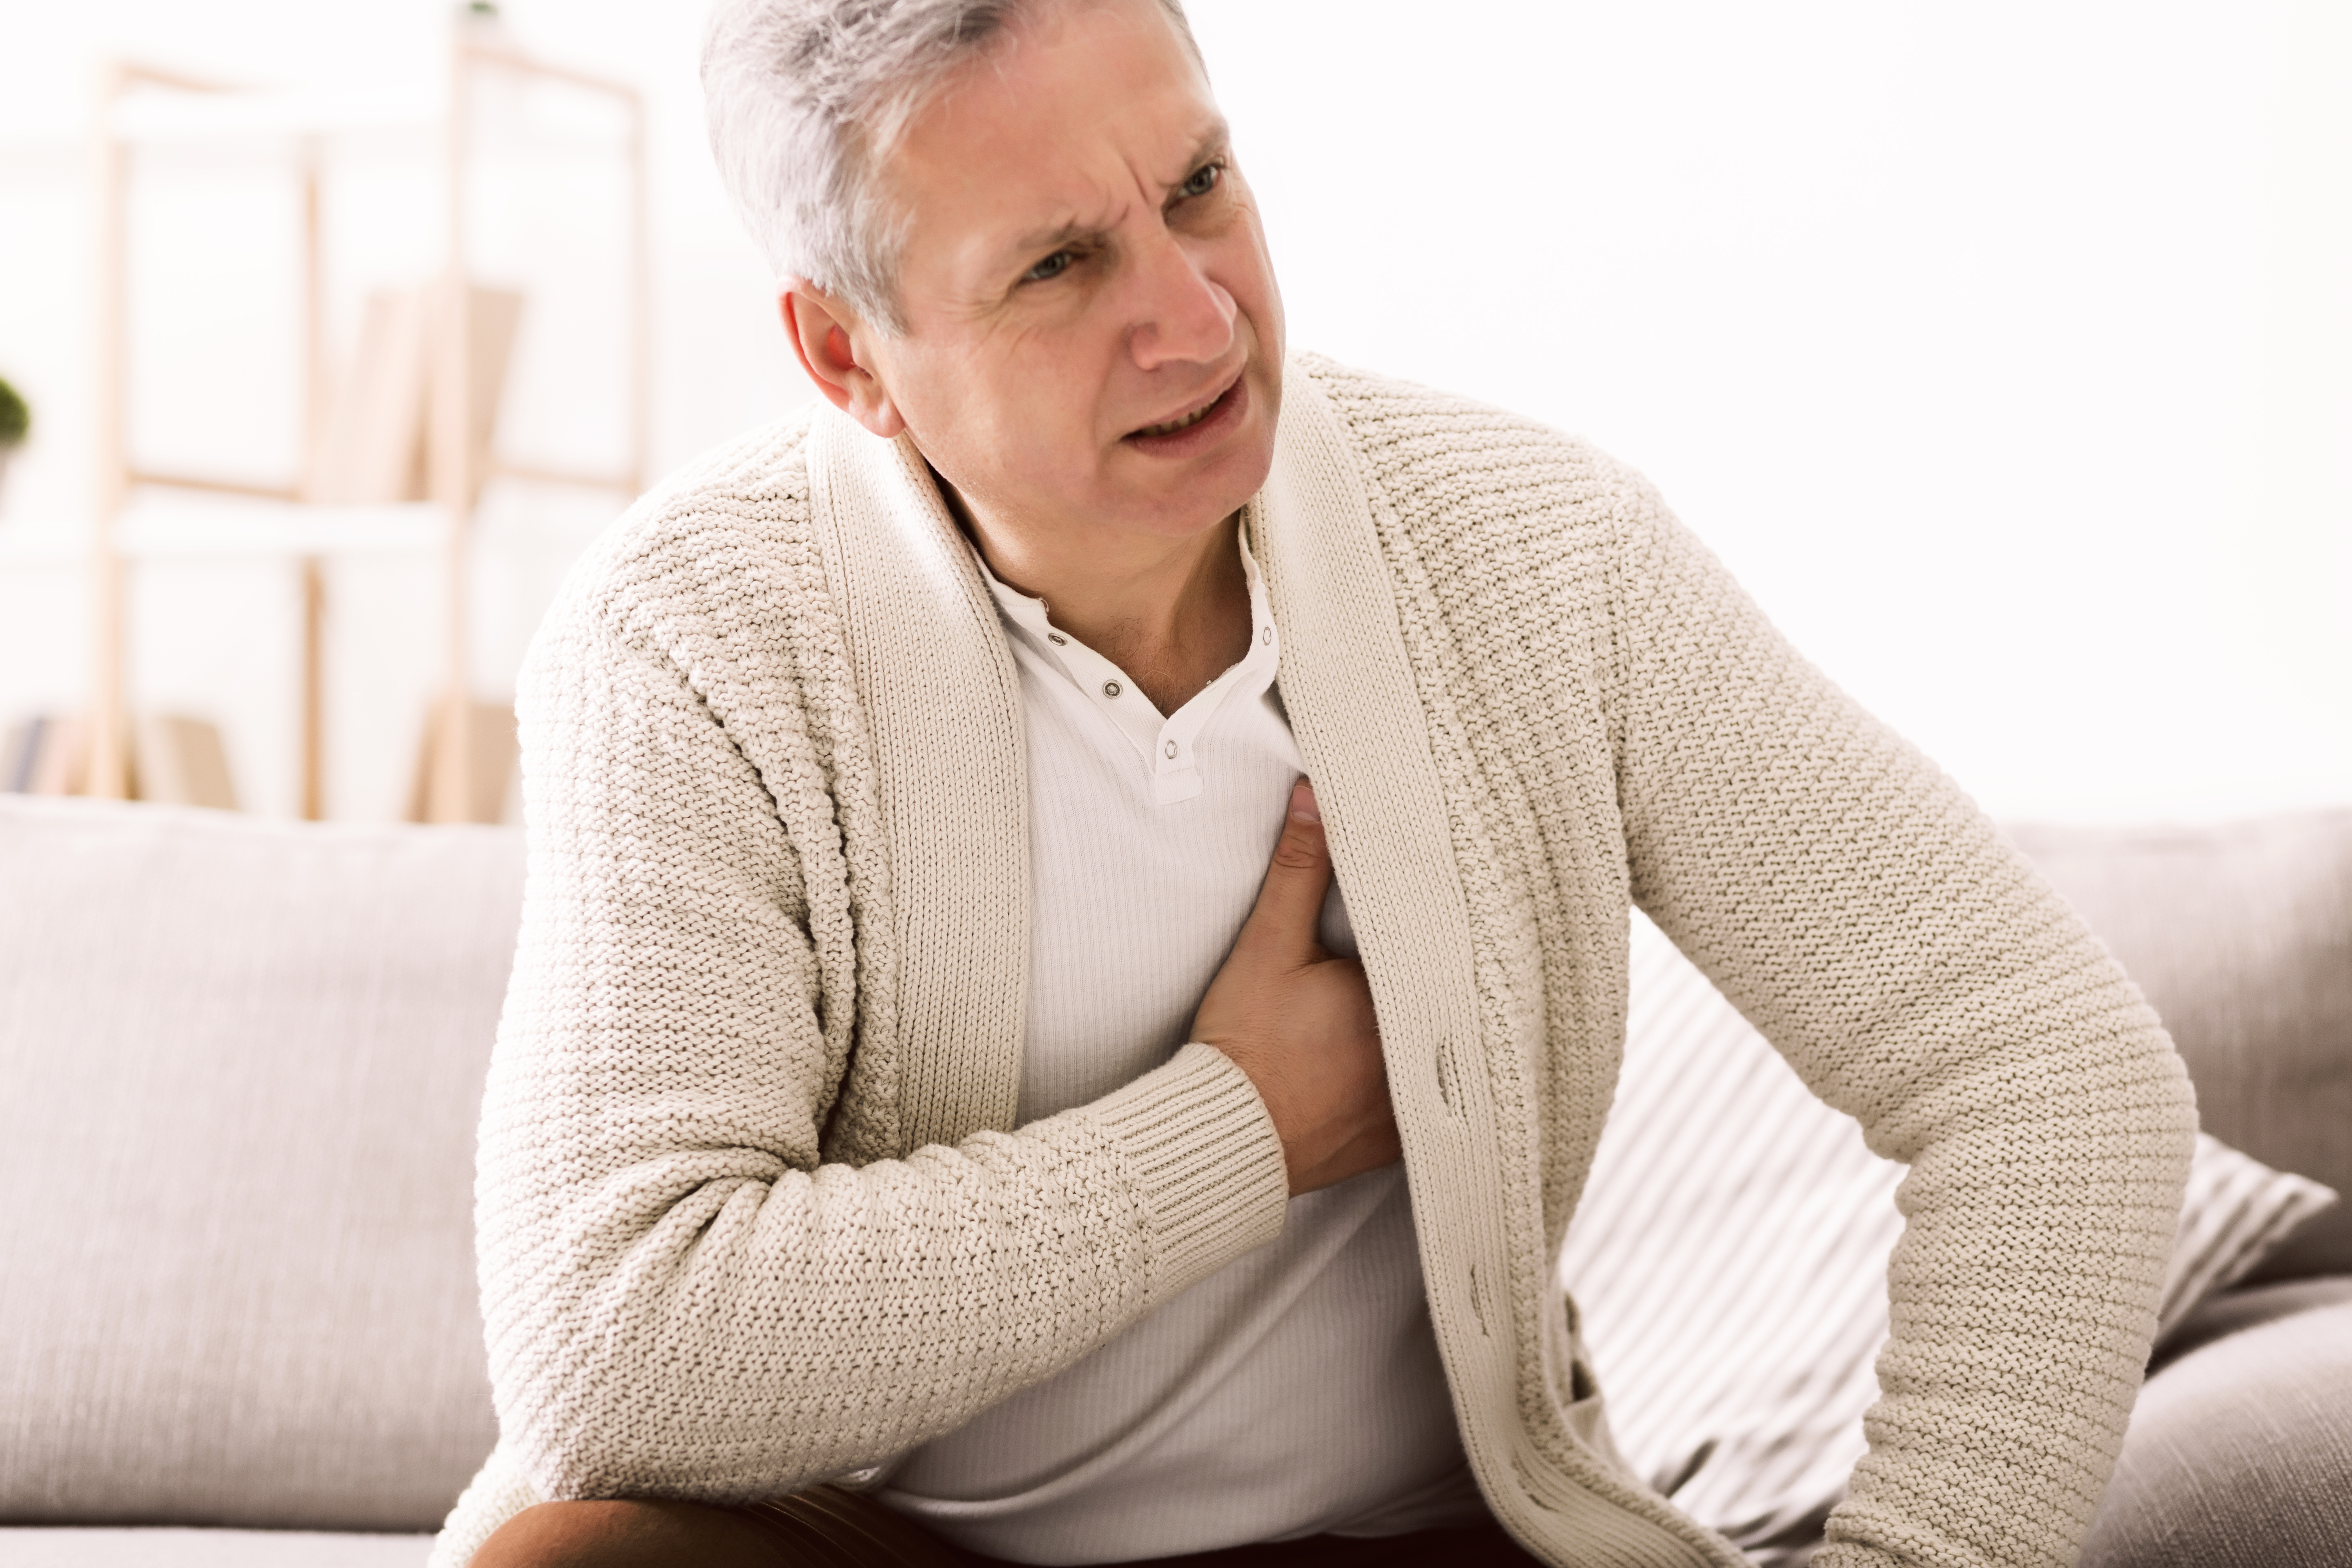 Did Your Heart Skip a Beat? All about Arrhythmia